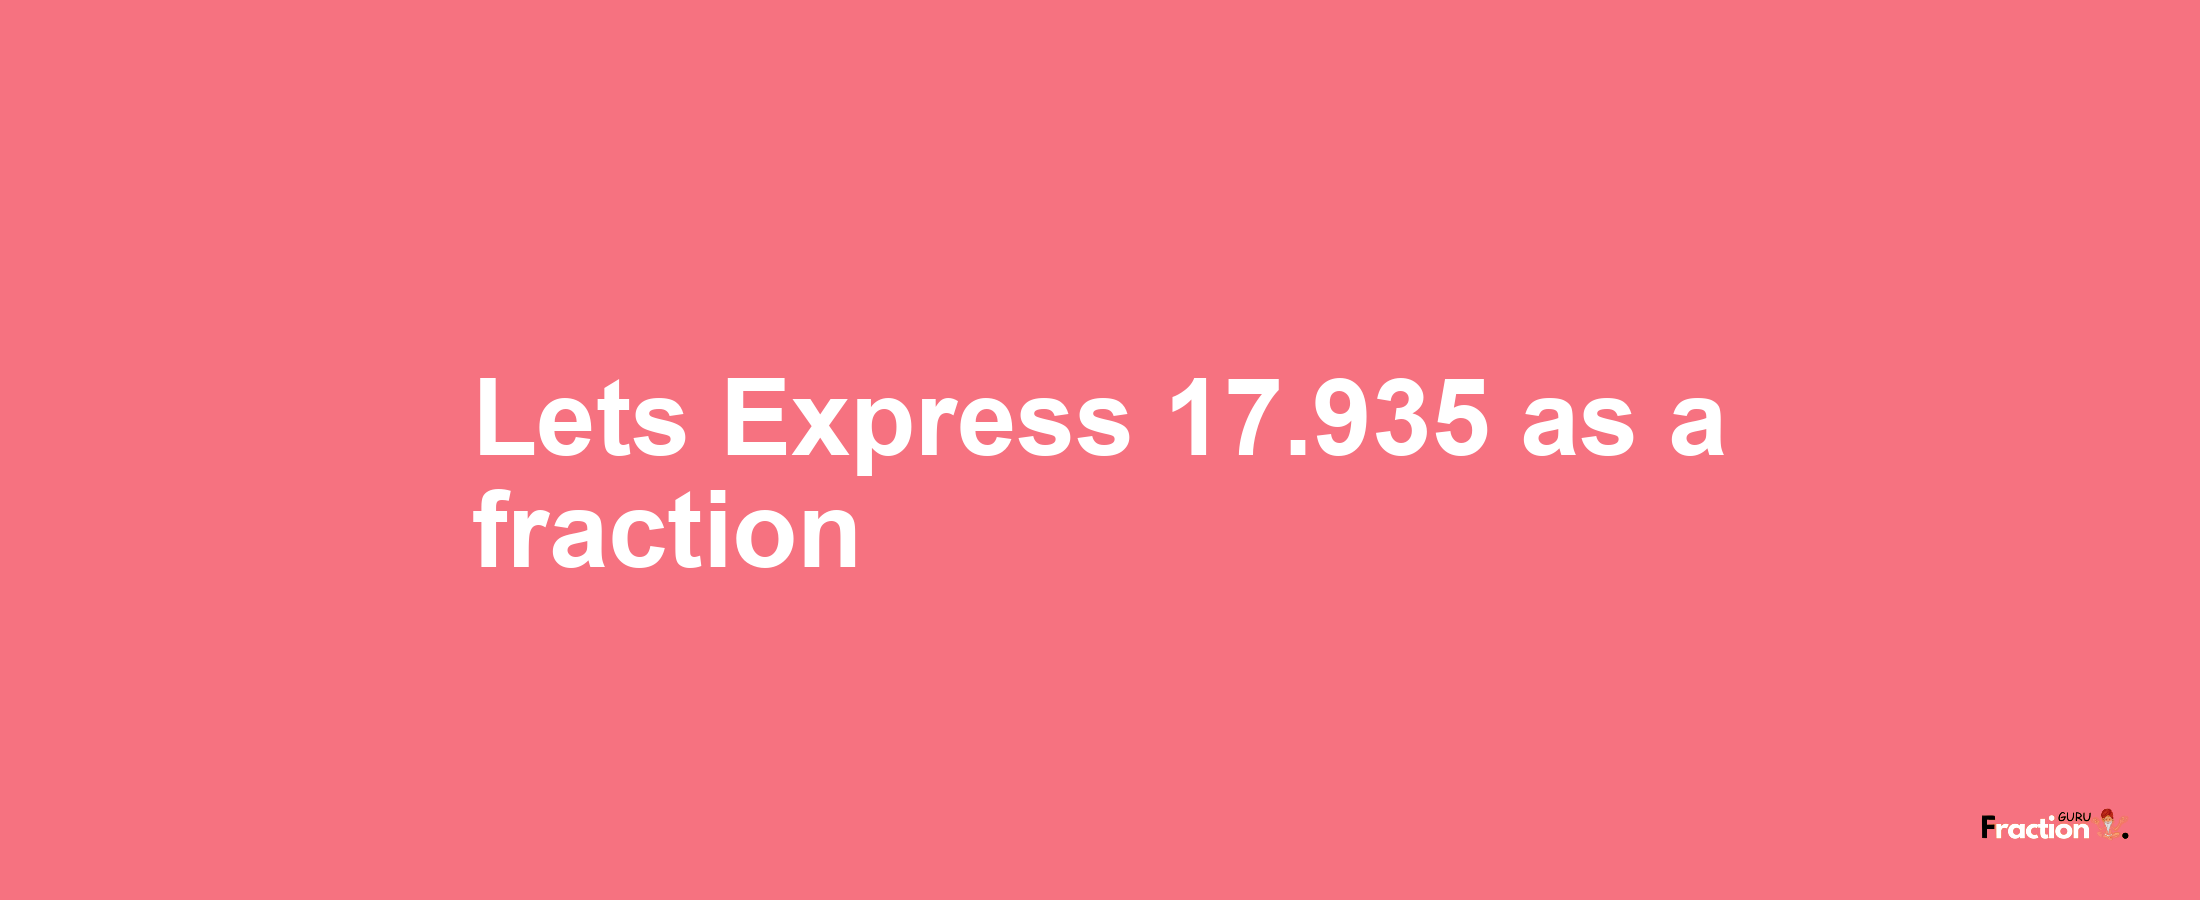 Lets Express 17.935 as afraction